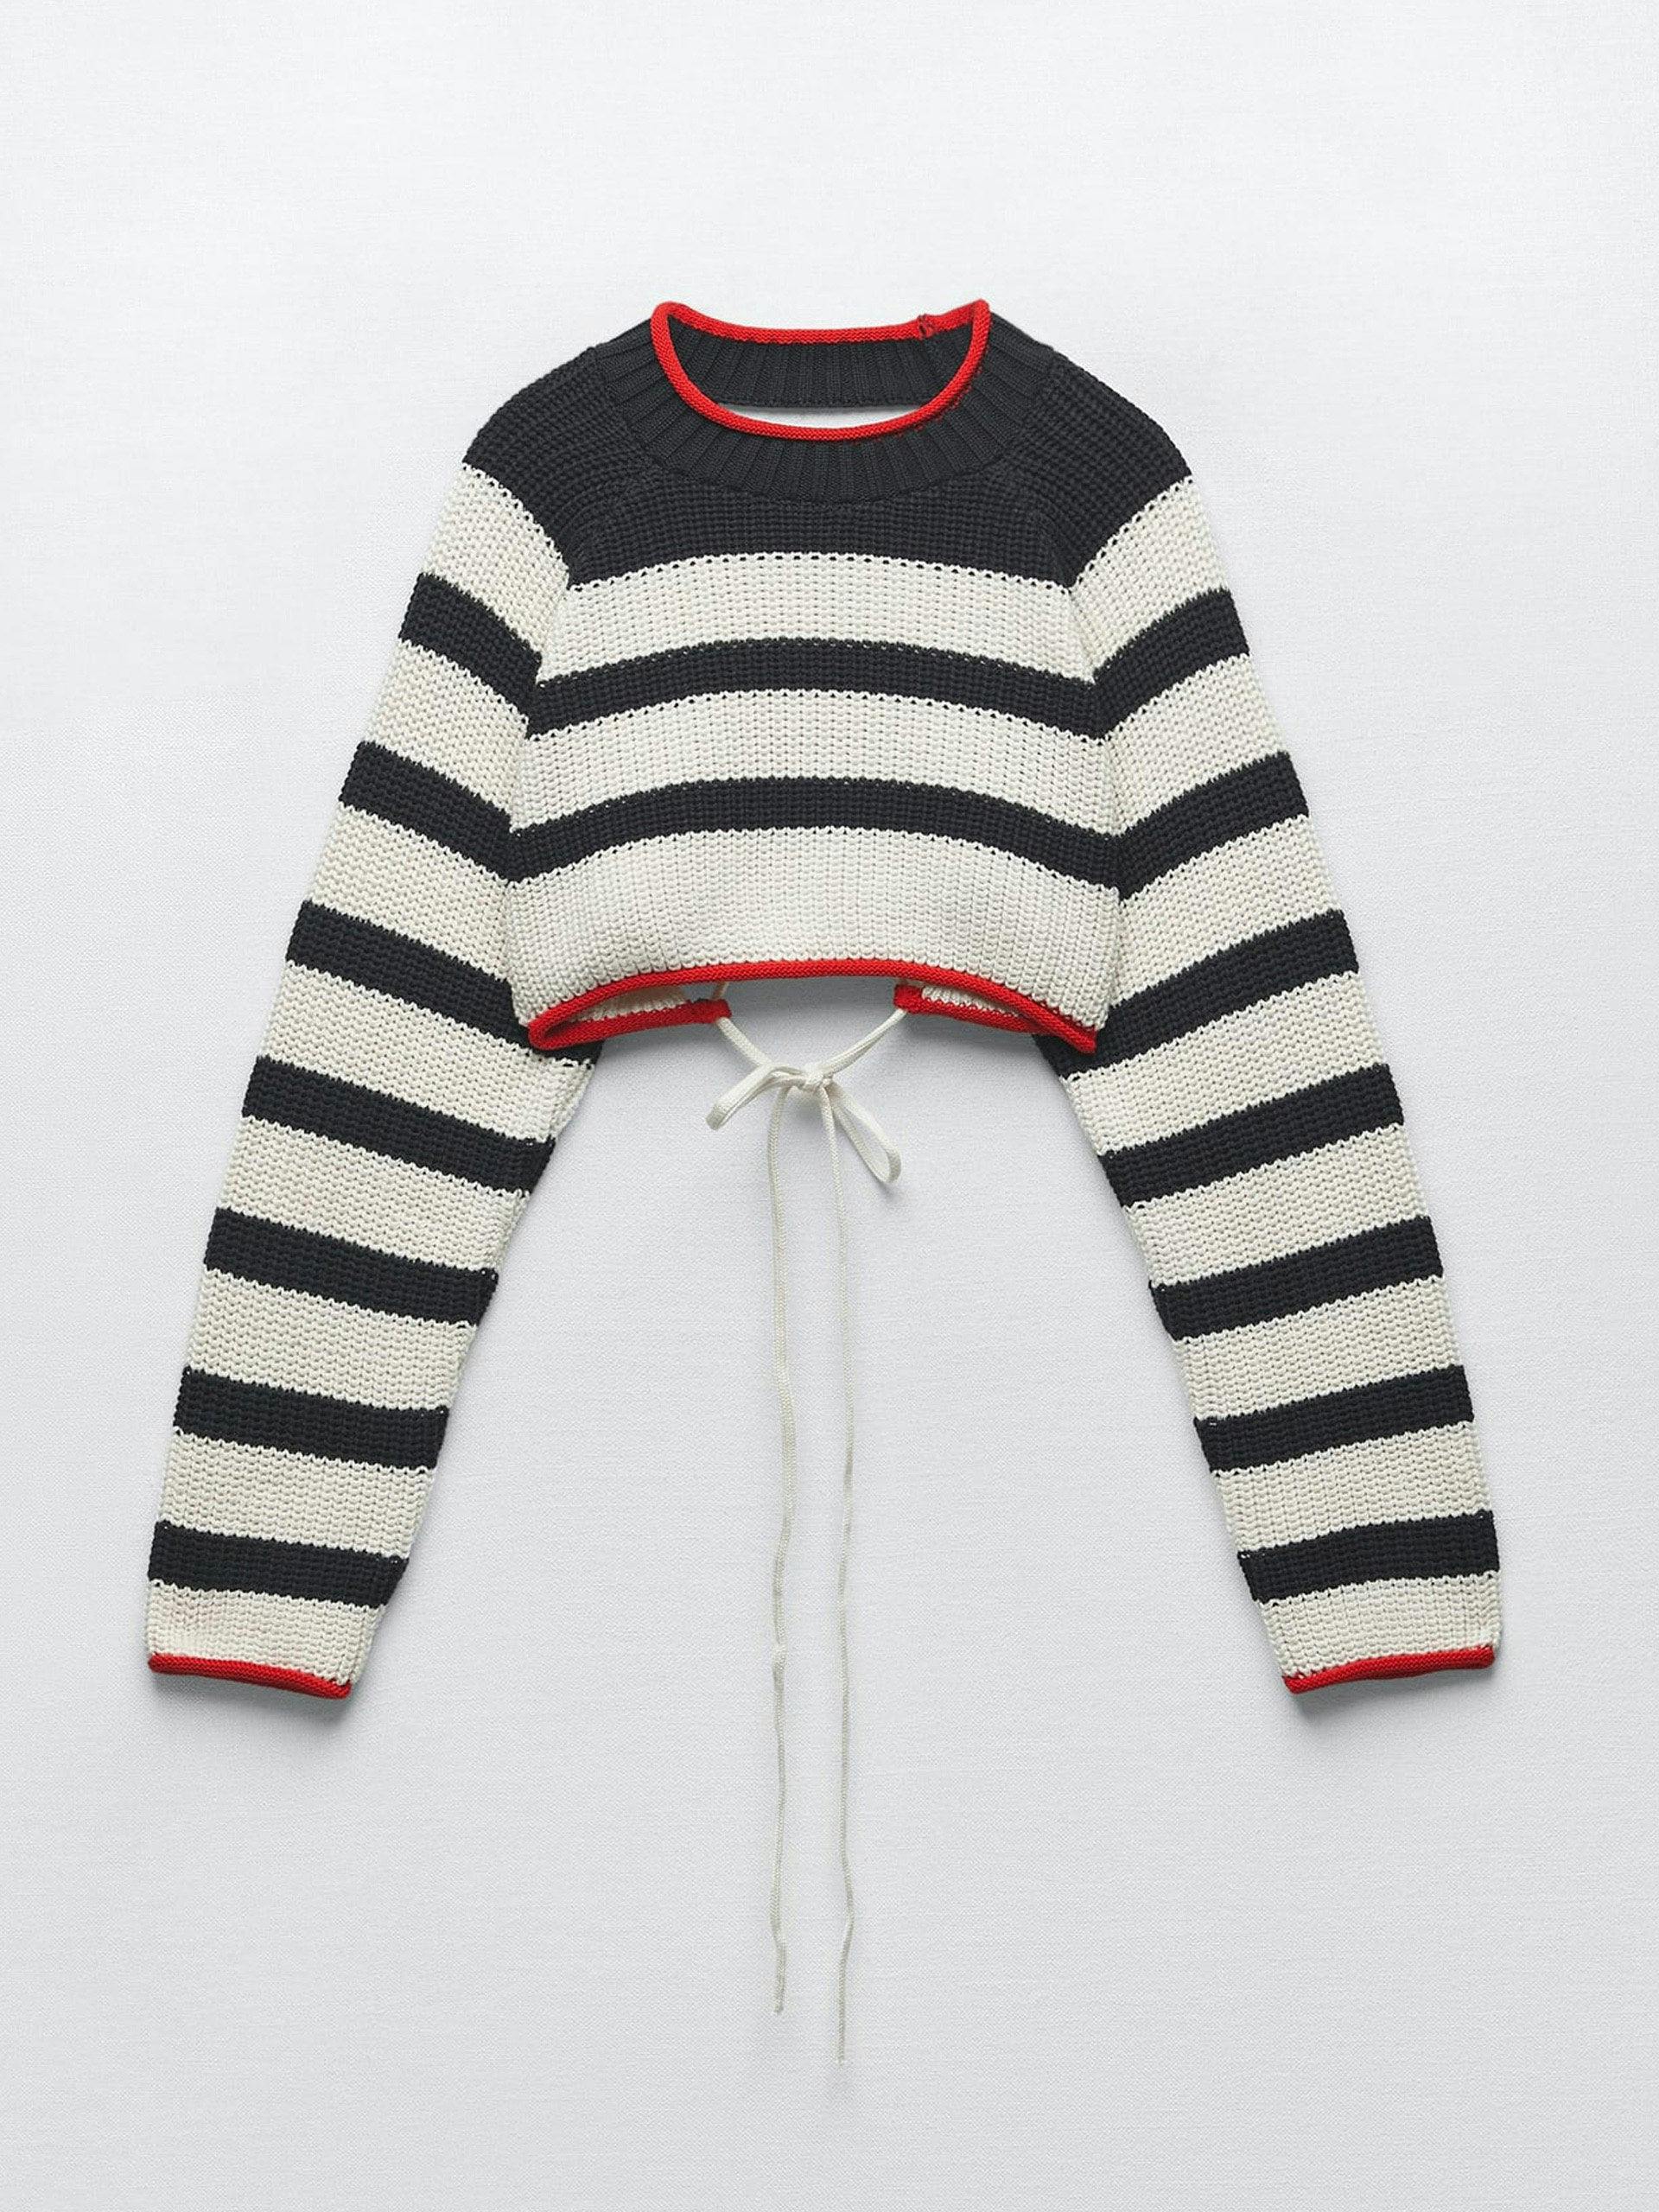 White, navy and red cropped jumper